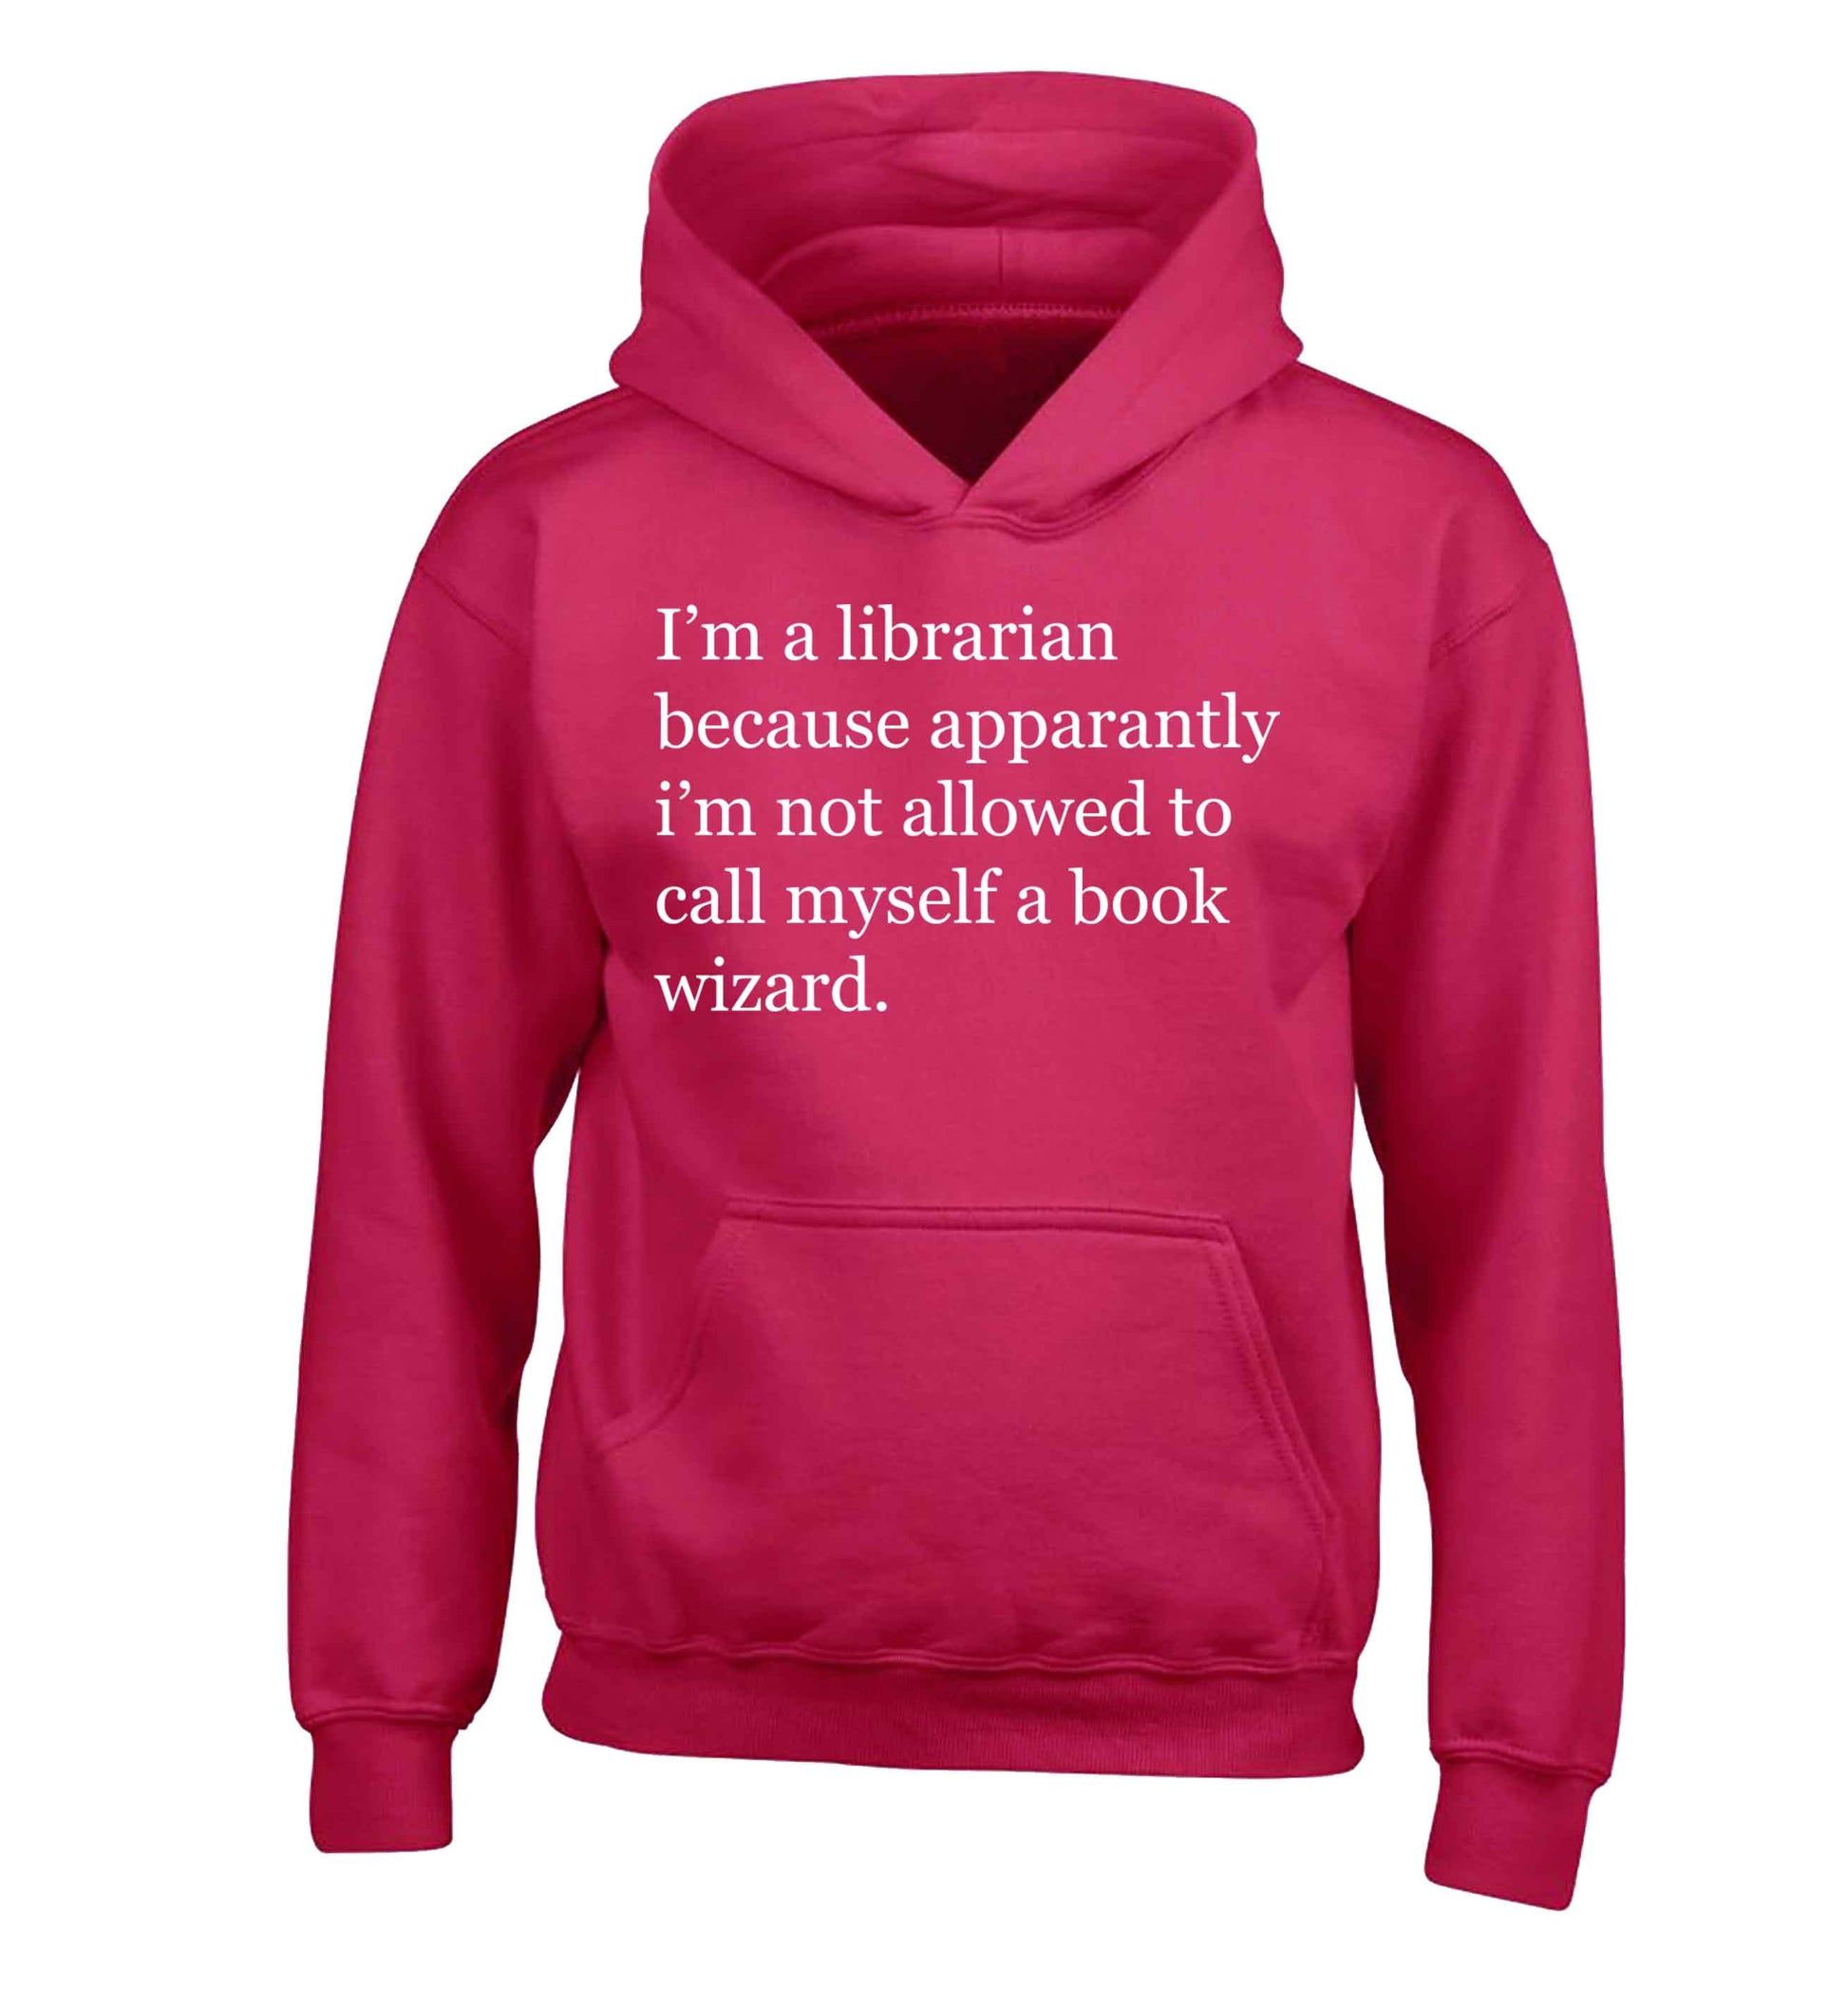 i√ïm a librarian because apparantly i√ïm not allowed to call myself a book wizard children's pink hoodie 12-13 Years